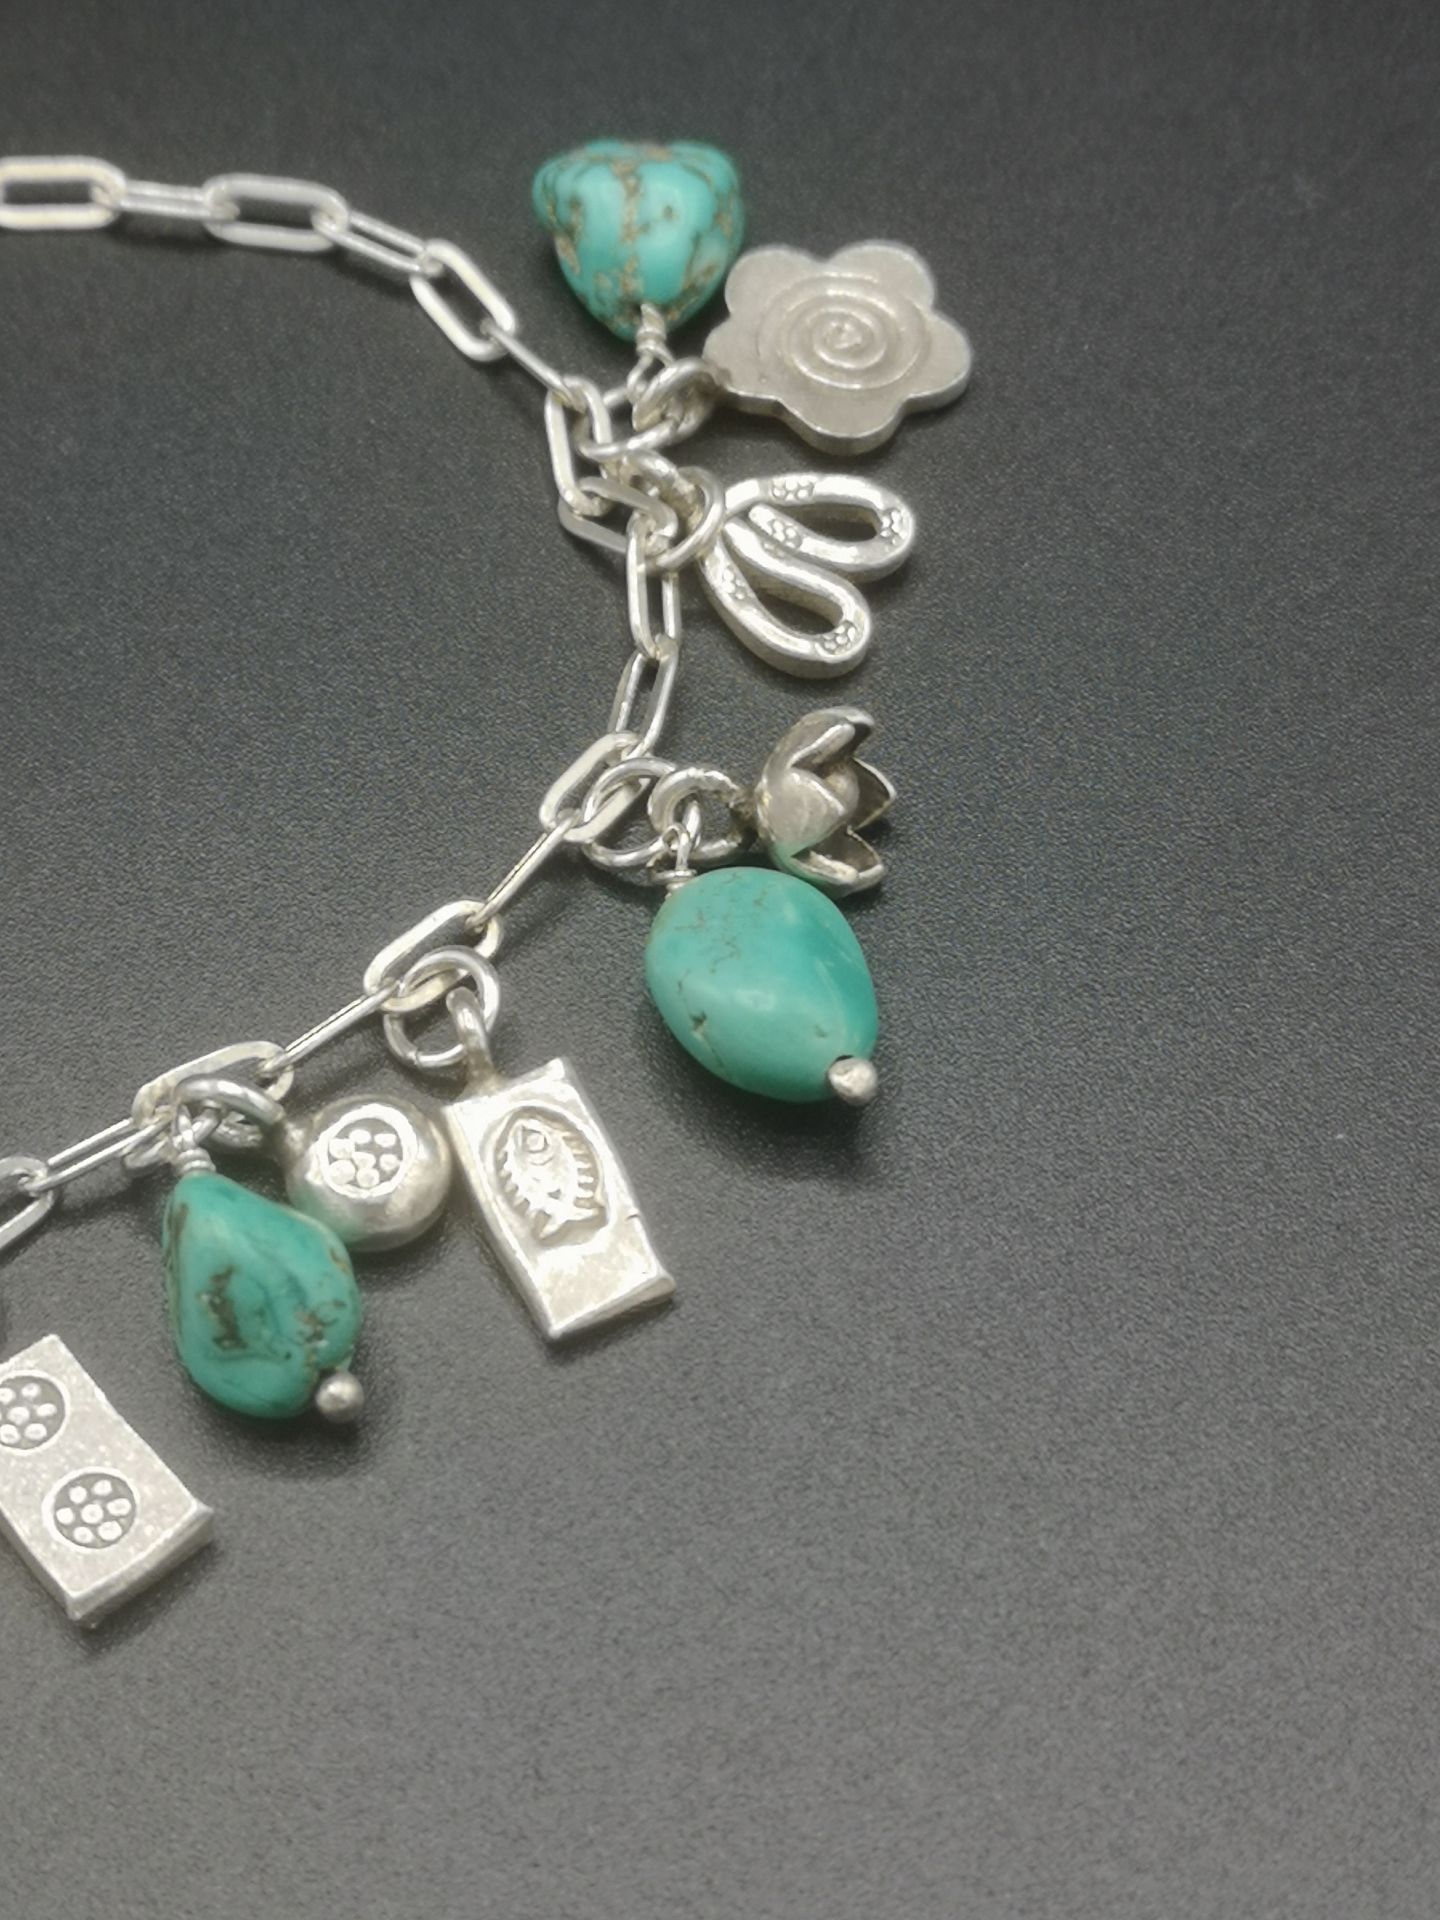 Silver and turquoise charm bracelet - Image 2 of 4